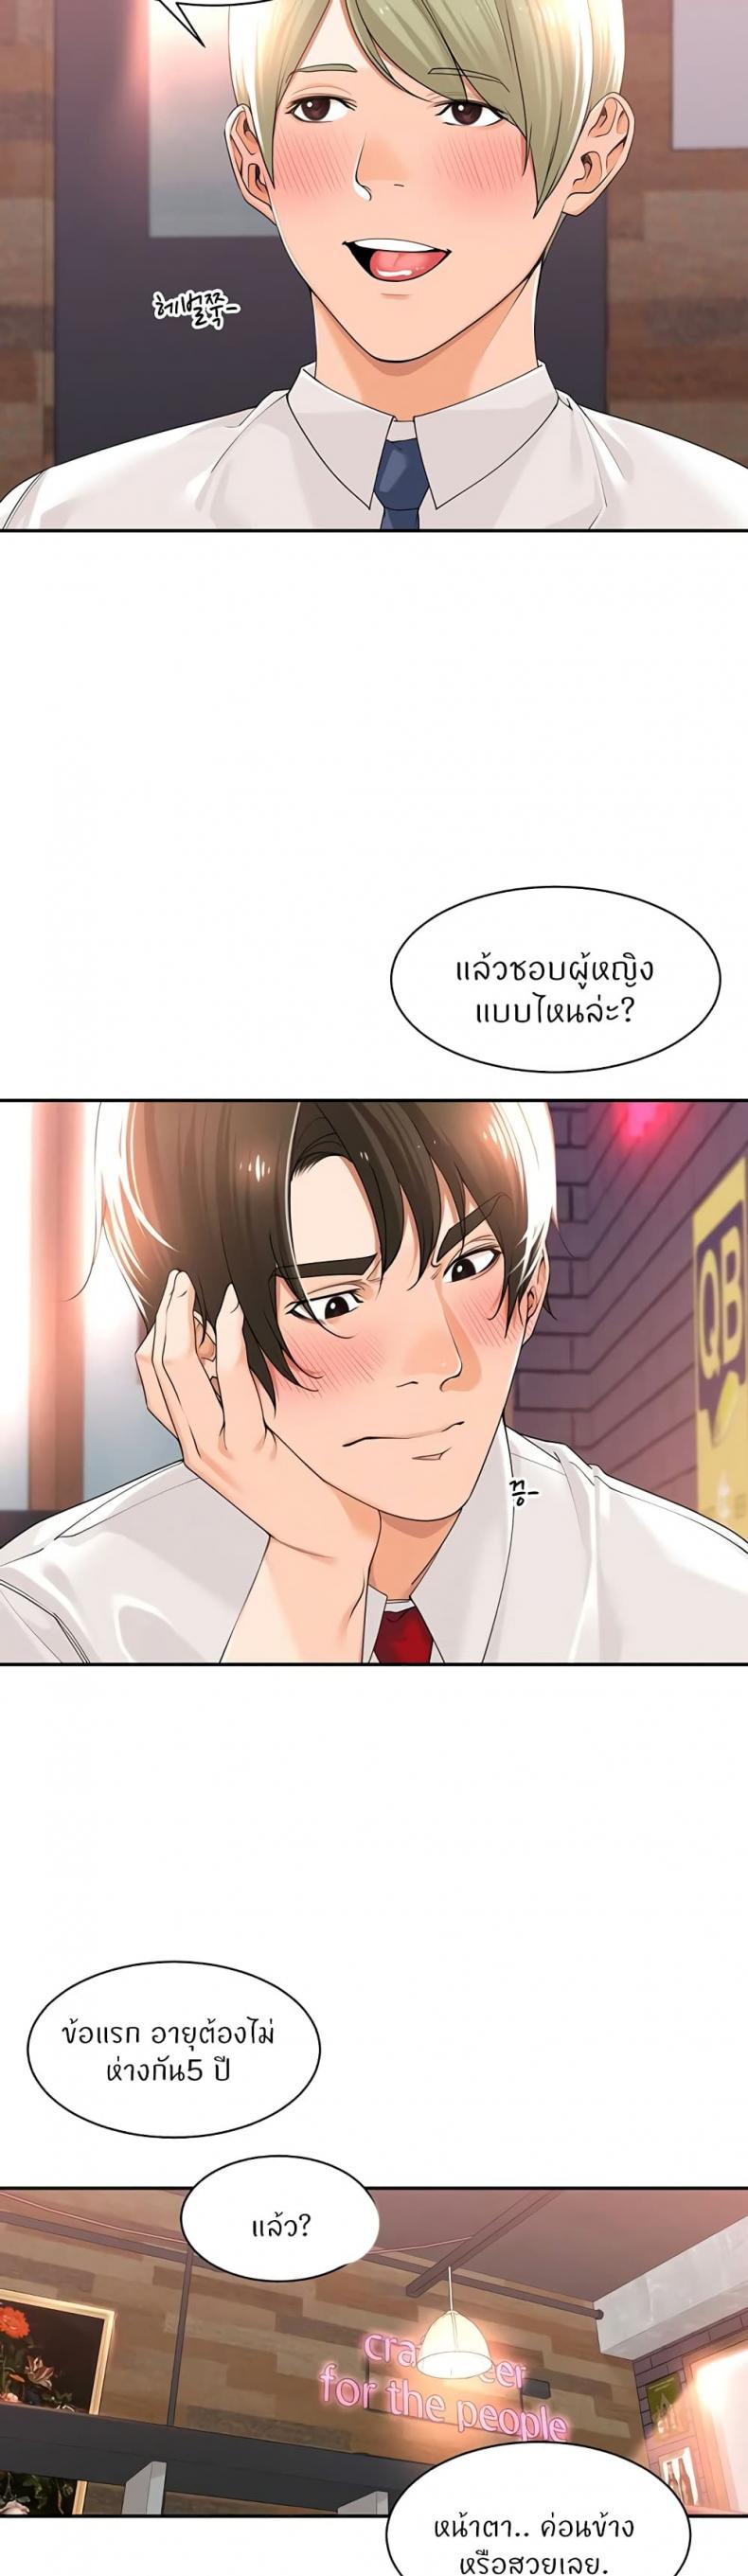 Manager, Please Scold Me 17 ภาพที่ 11